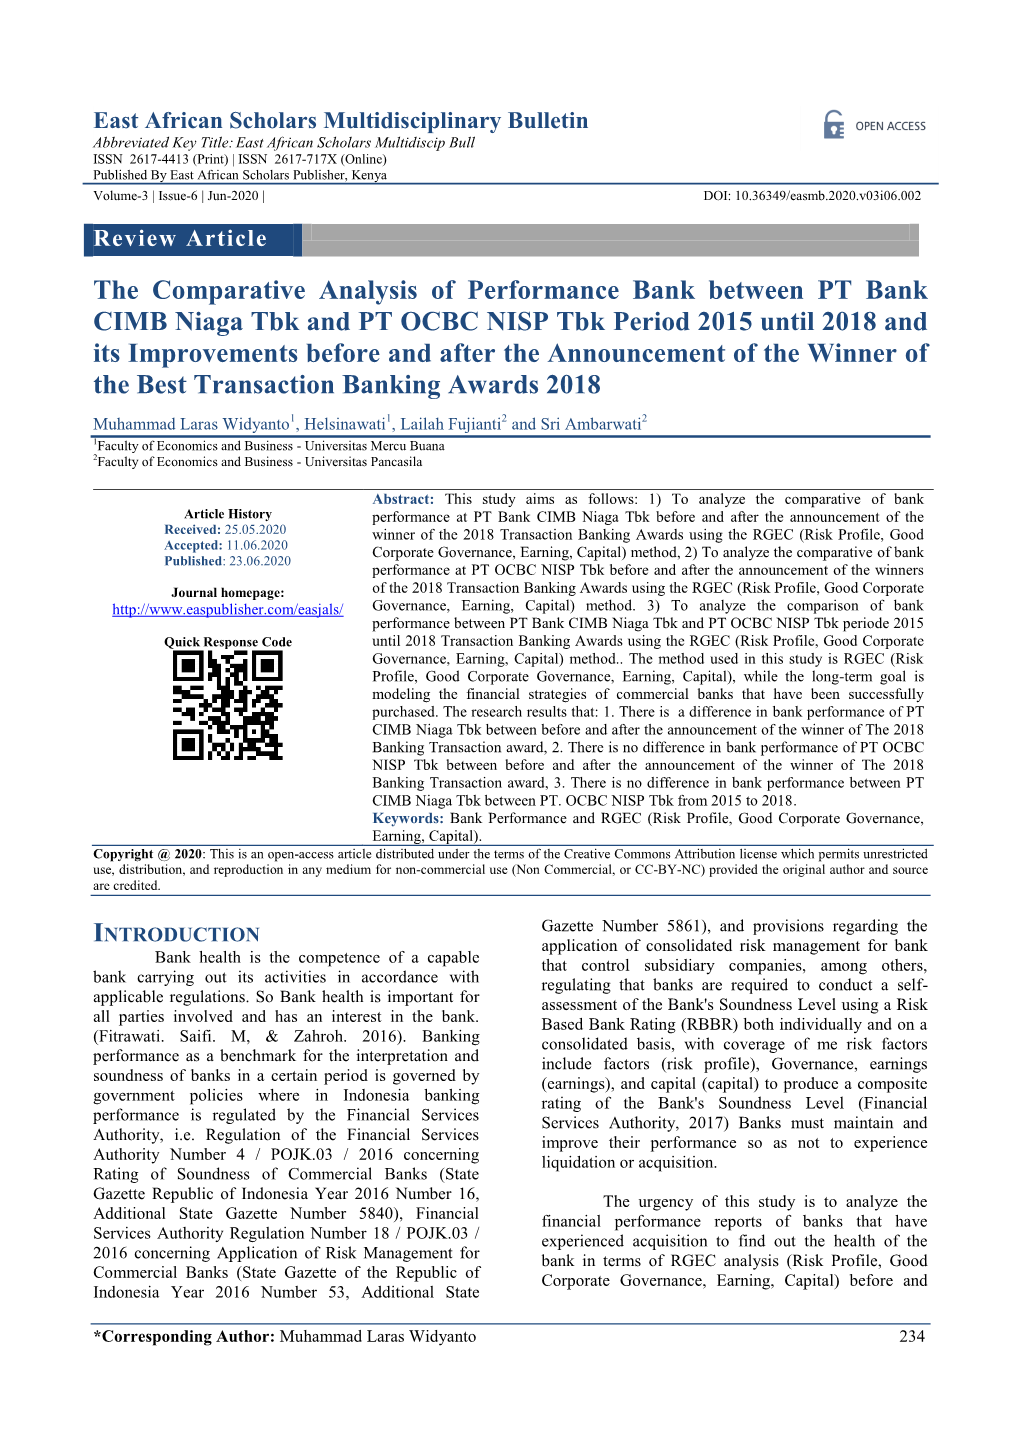 The Comparative Analysis of Performance Bank Between PT